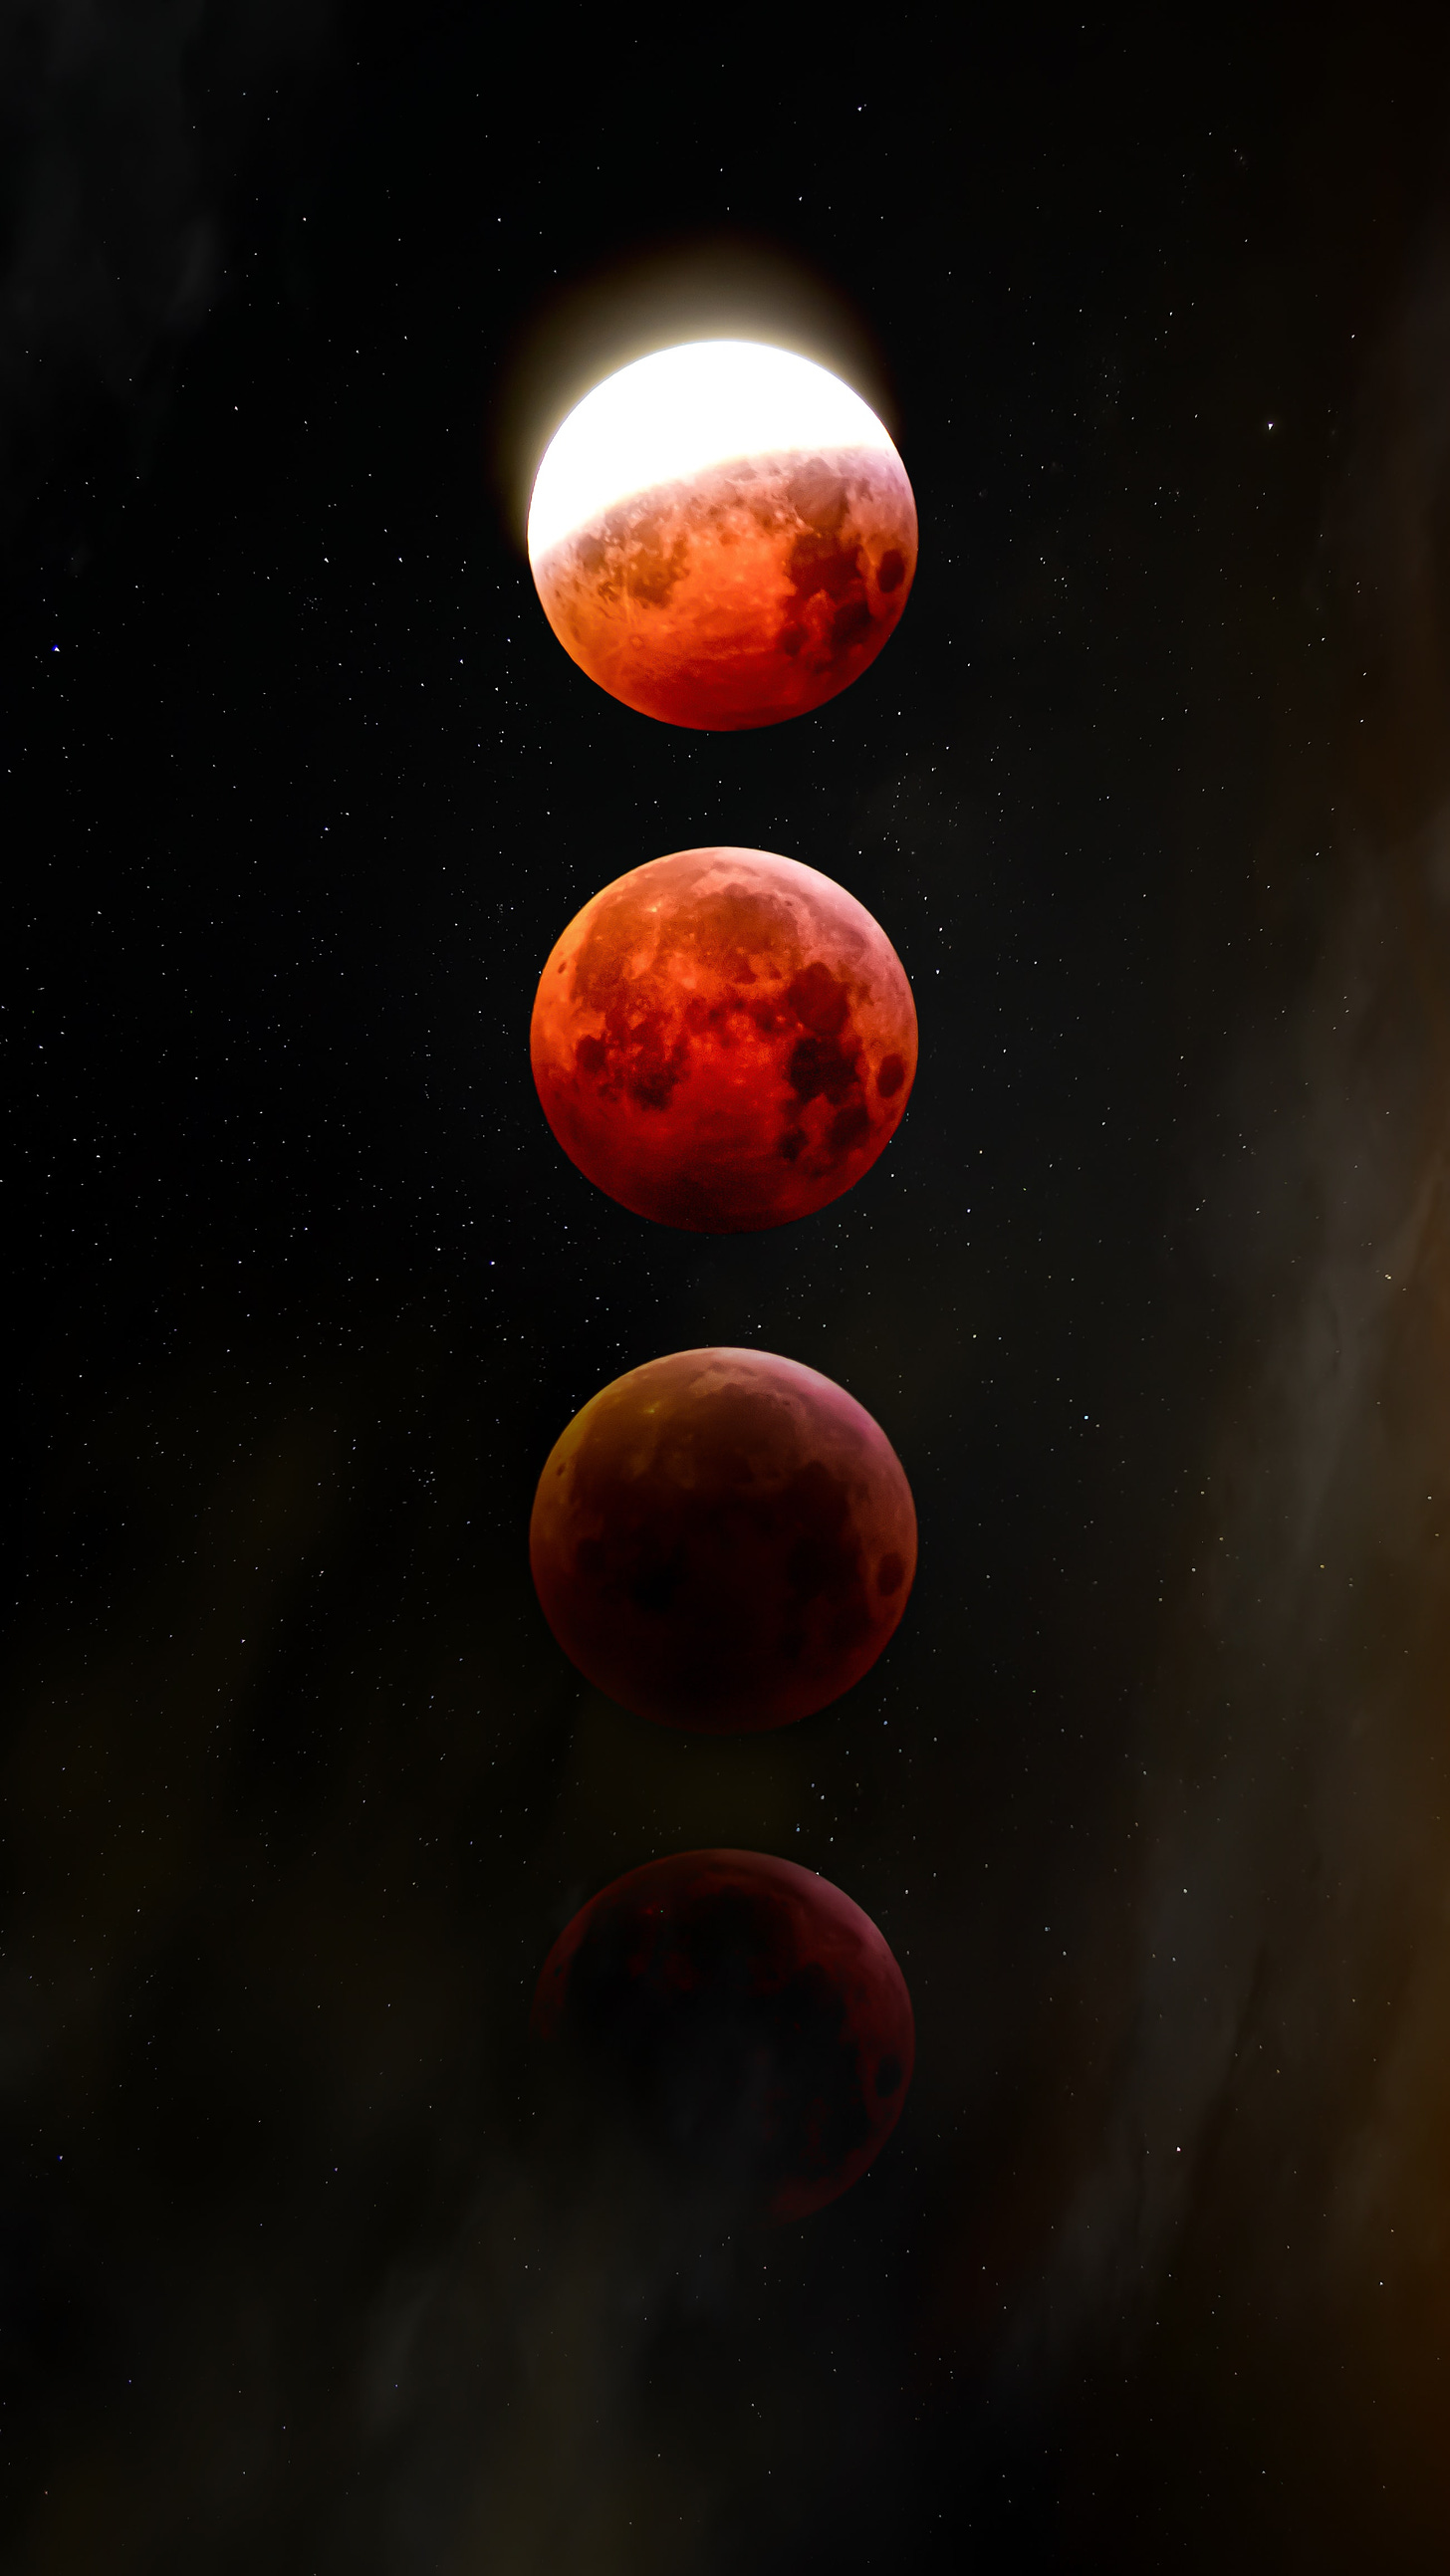 A vertical composite of the moon going through several stages of a lunar eclipse, starting partially illuminated at the top, then turning red, and then darkening.